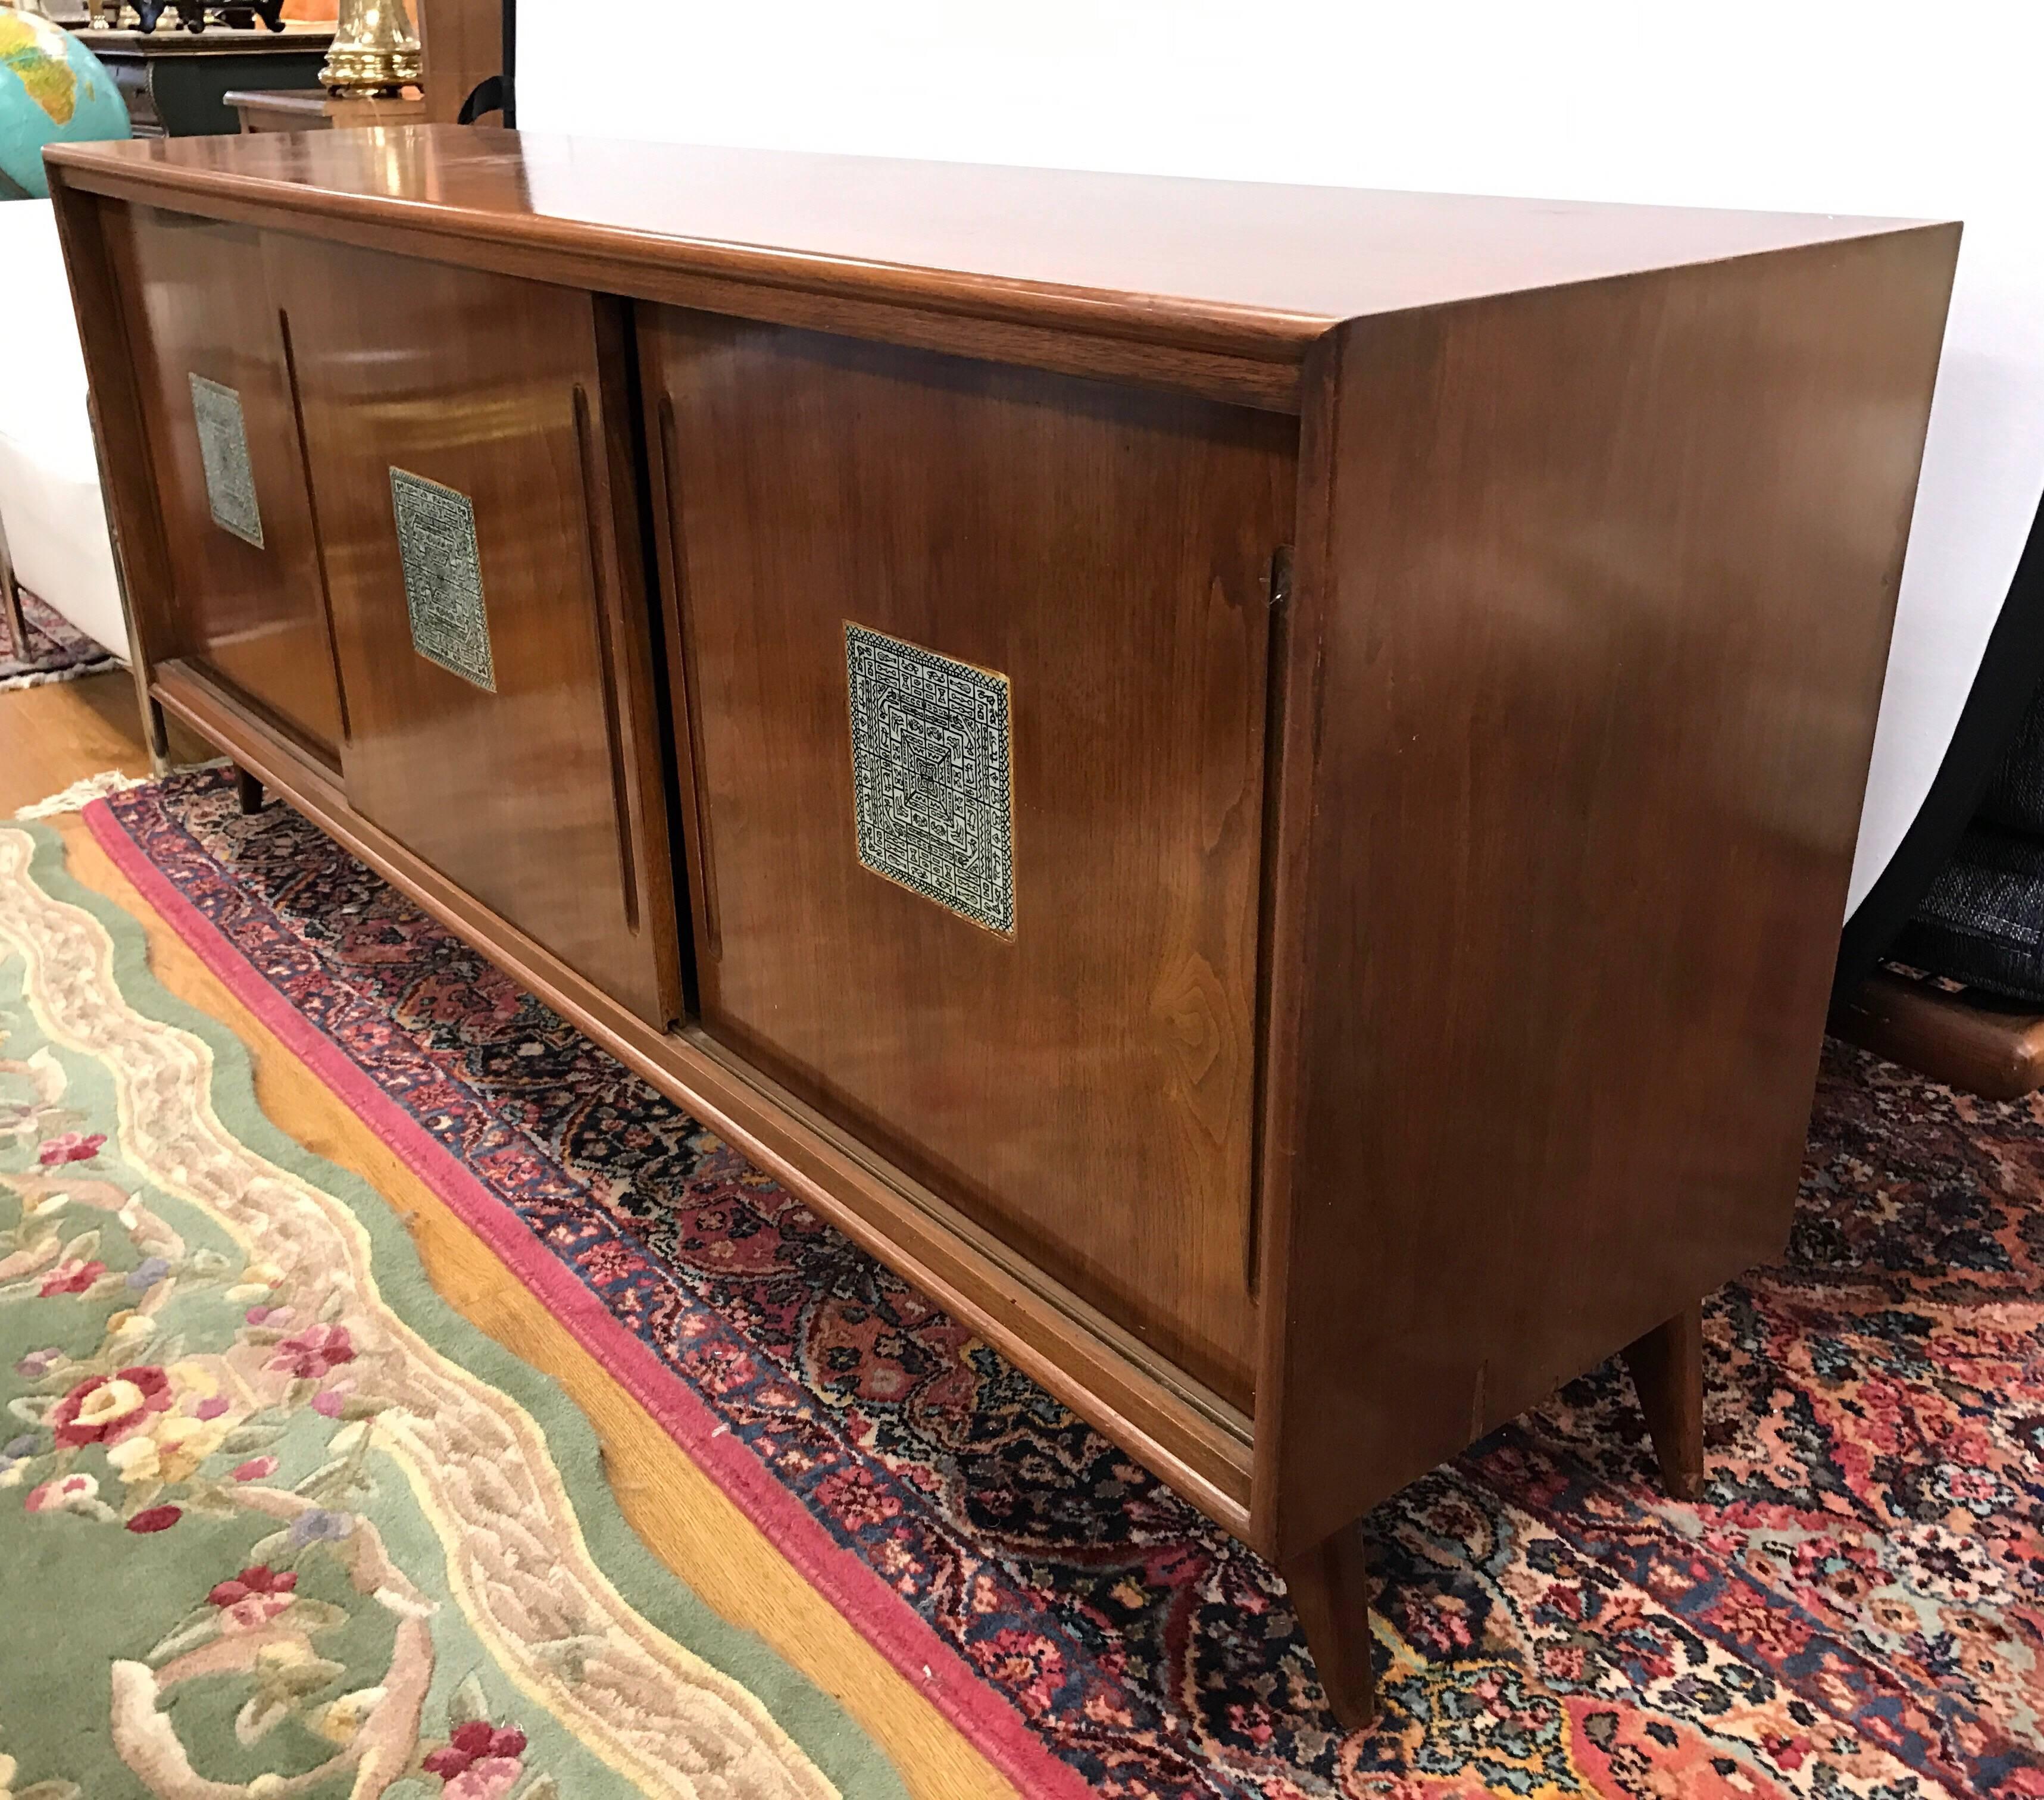 Midcentury walnut sideboard credenza with three sliding doors with tile inserts. The left and center compartments have three drawers; right compartment has two inserts for glasses and bottles.